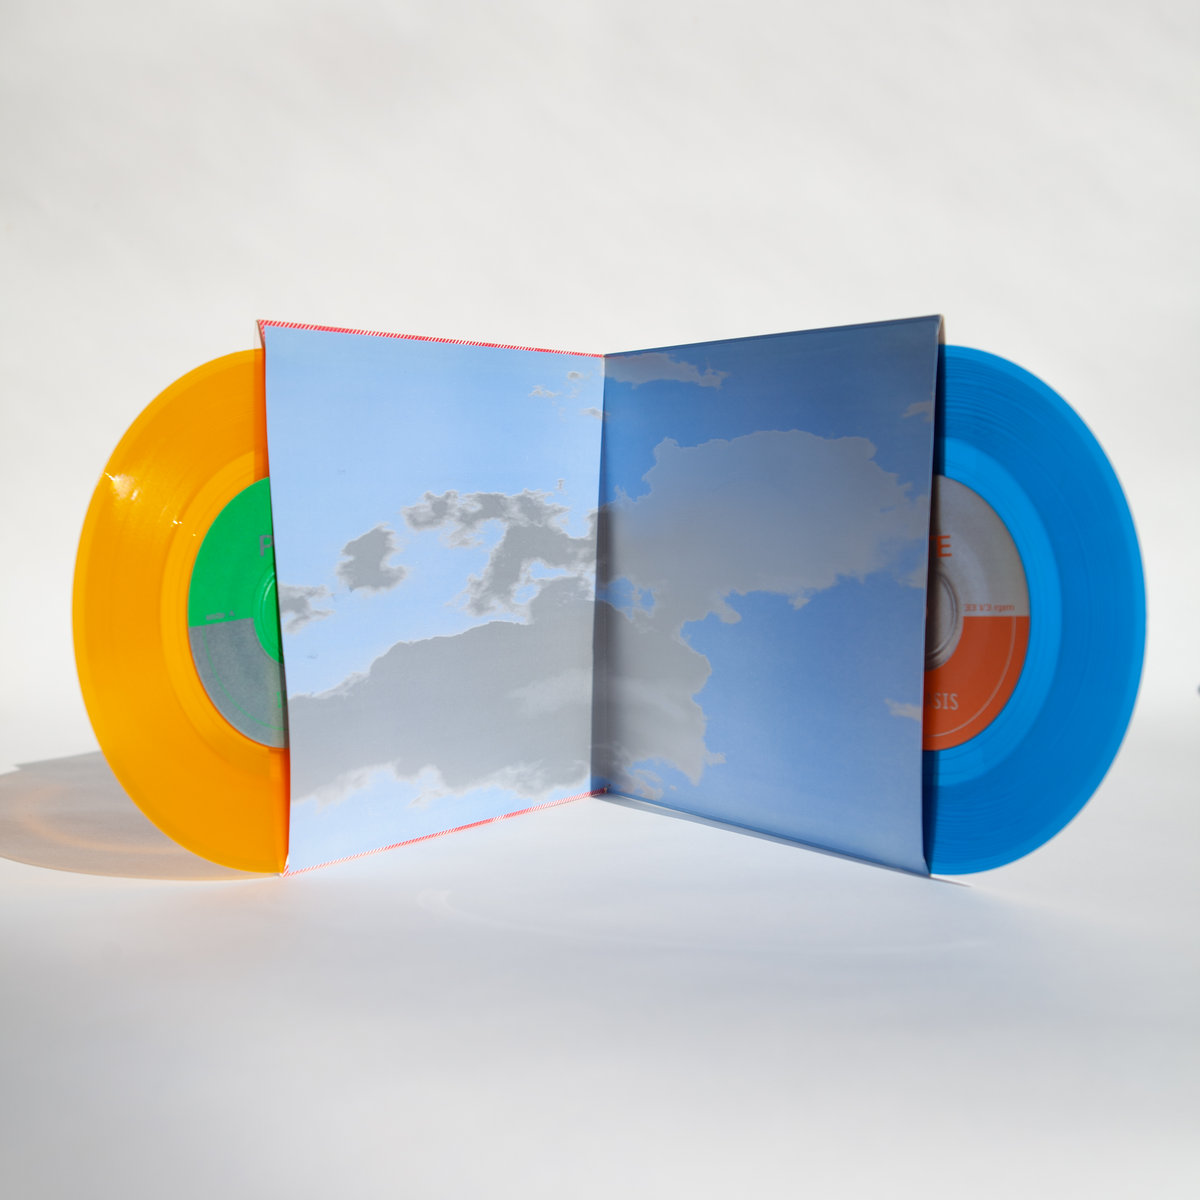 Pete dual 7" on colored vinyl